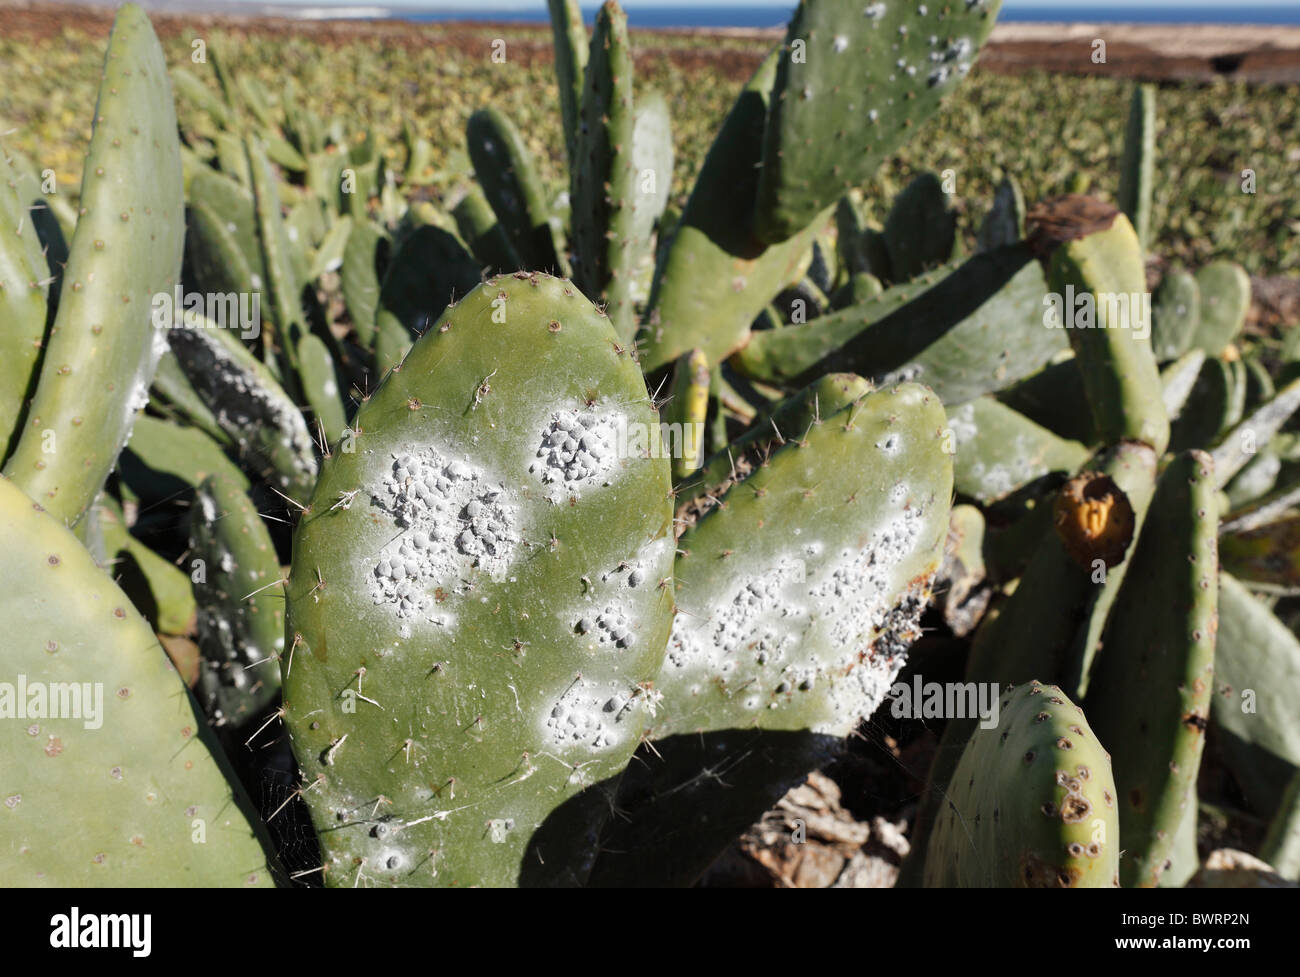 Cochineal (Dactylopius coccus) on Prickly Pear (Opuntia ficus-indica), Lanzarote, Canary Islands, Spain, Europe Stock Photo